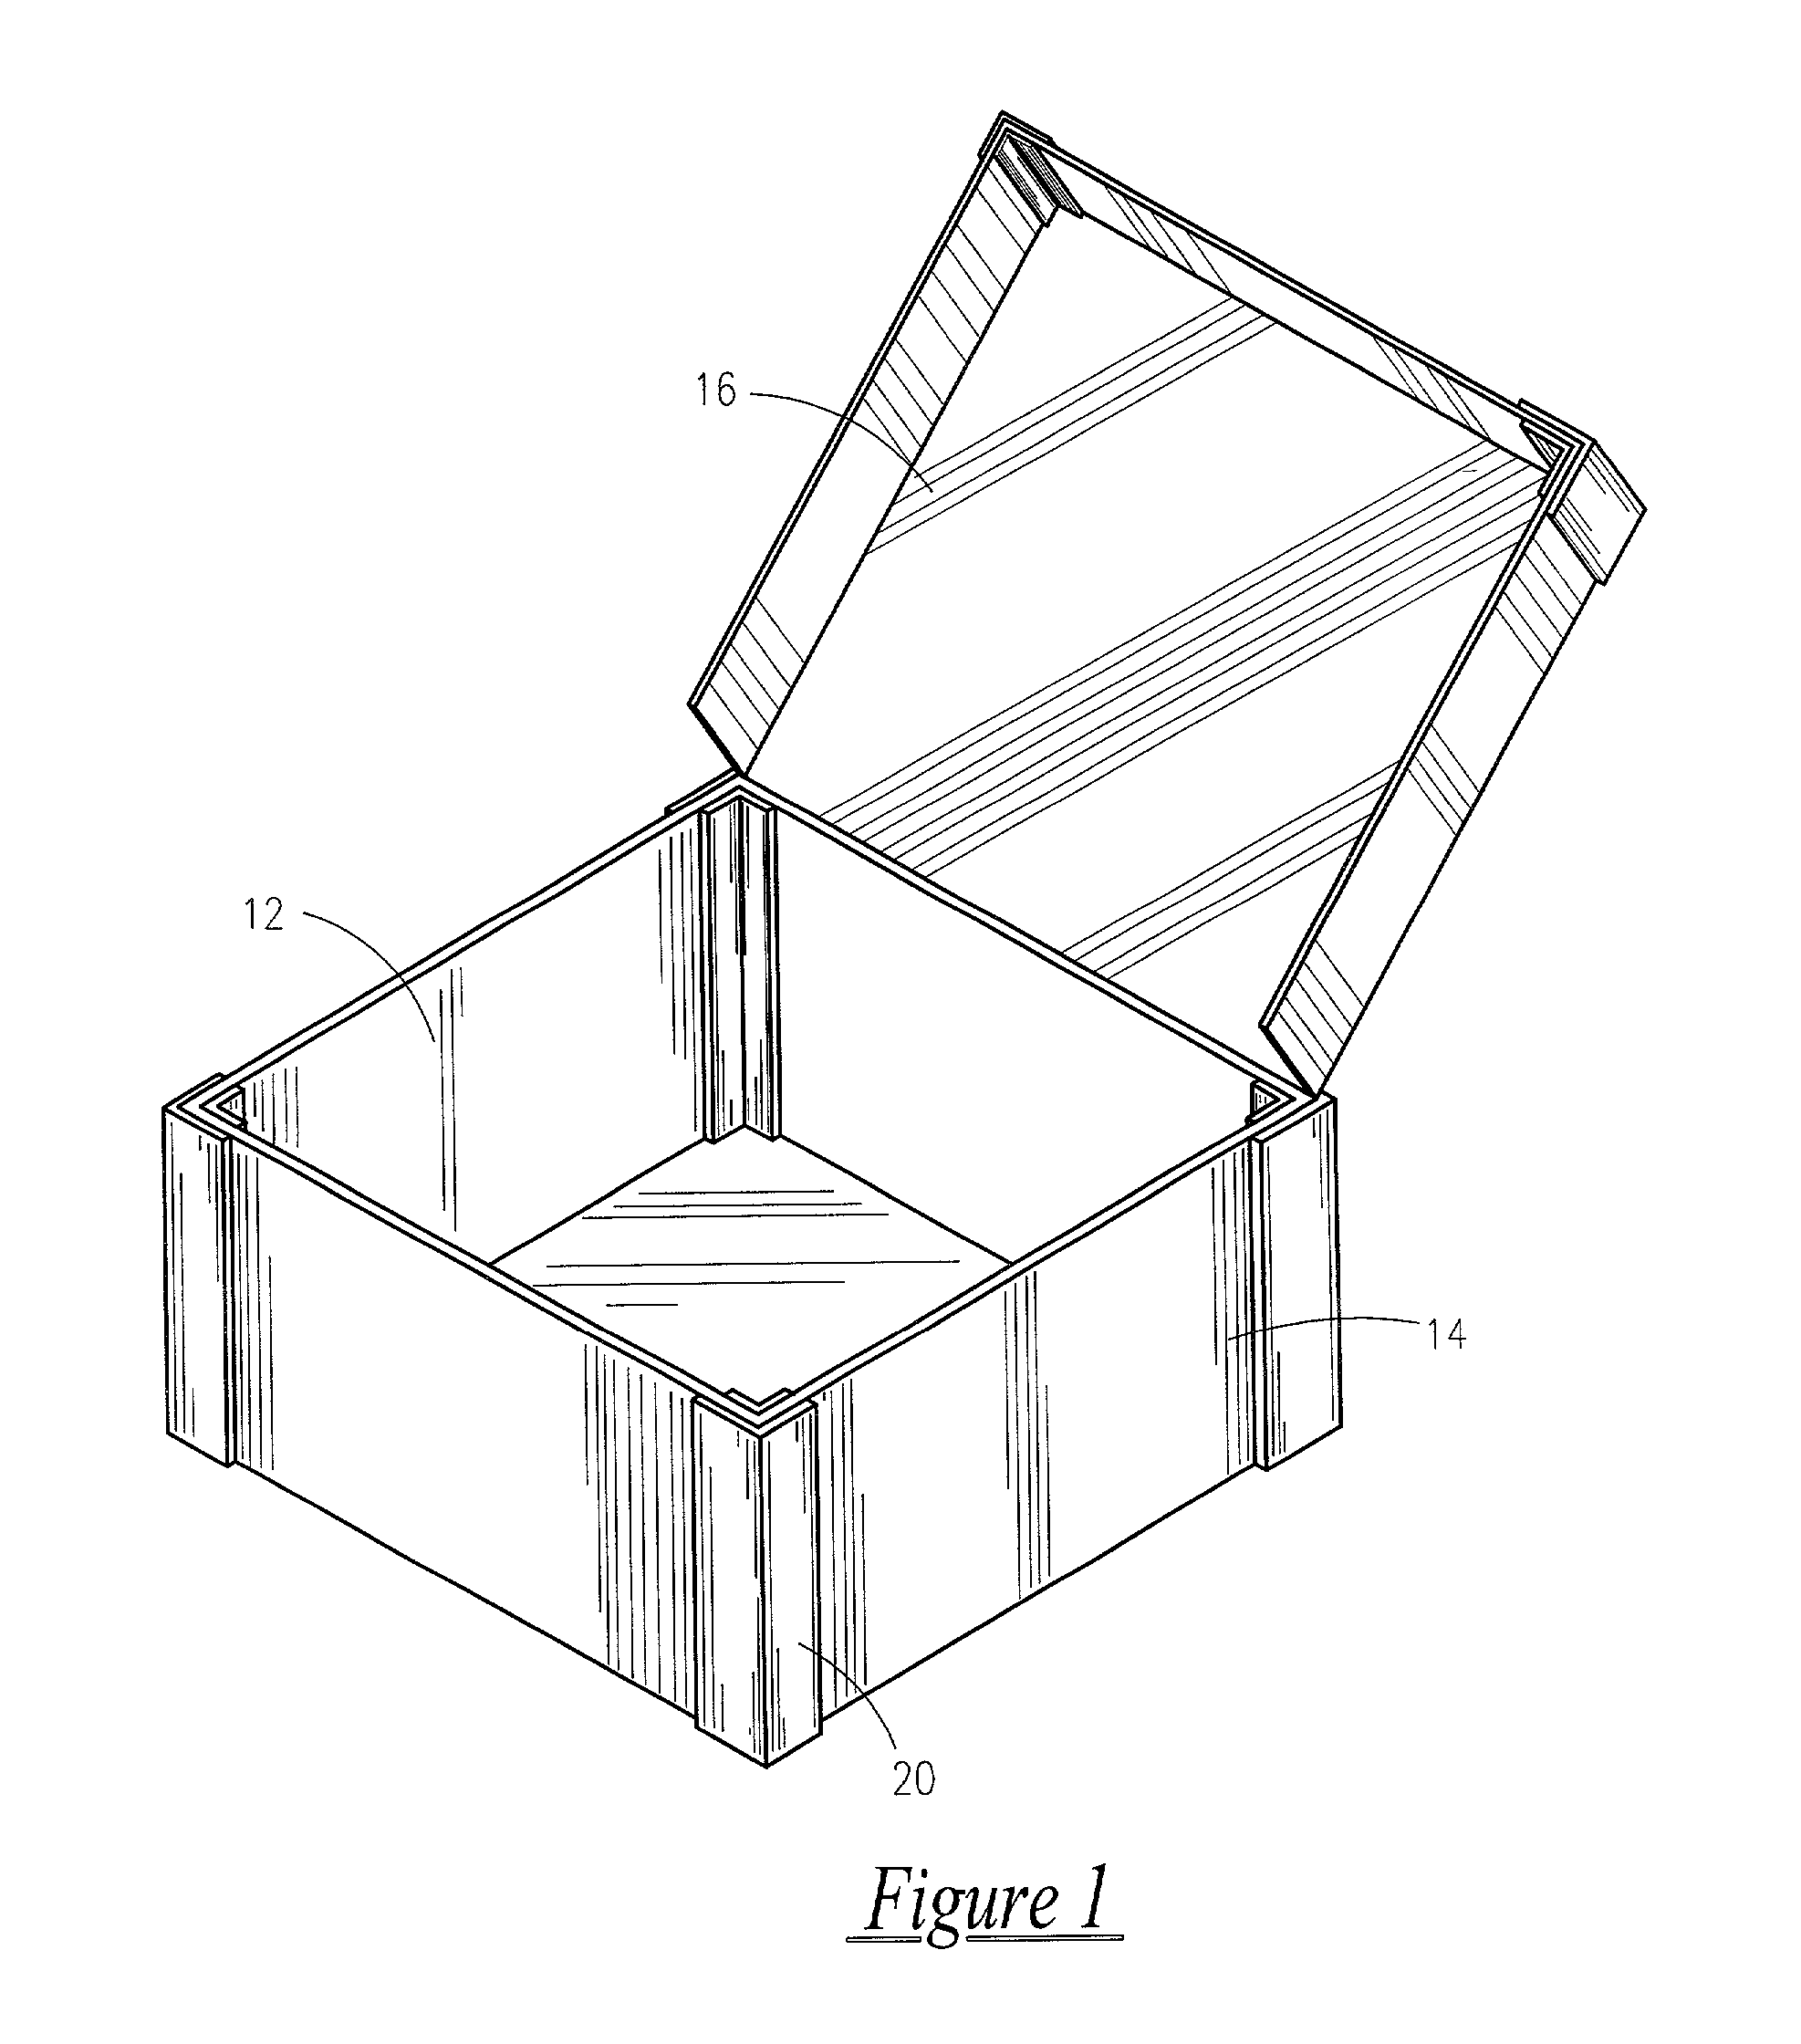 Packaging box with reinforced corners